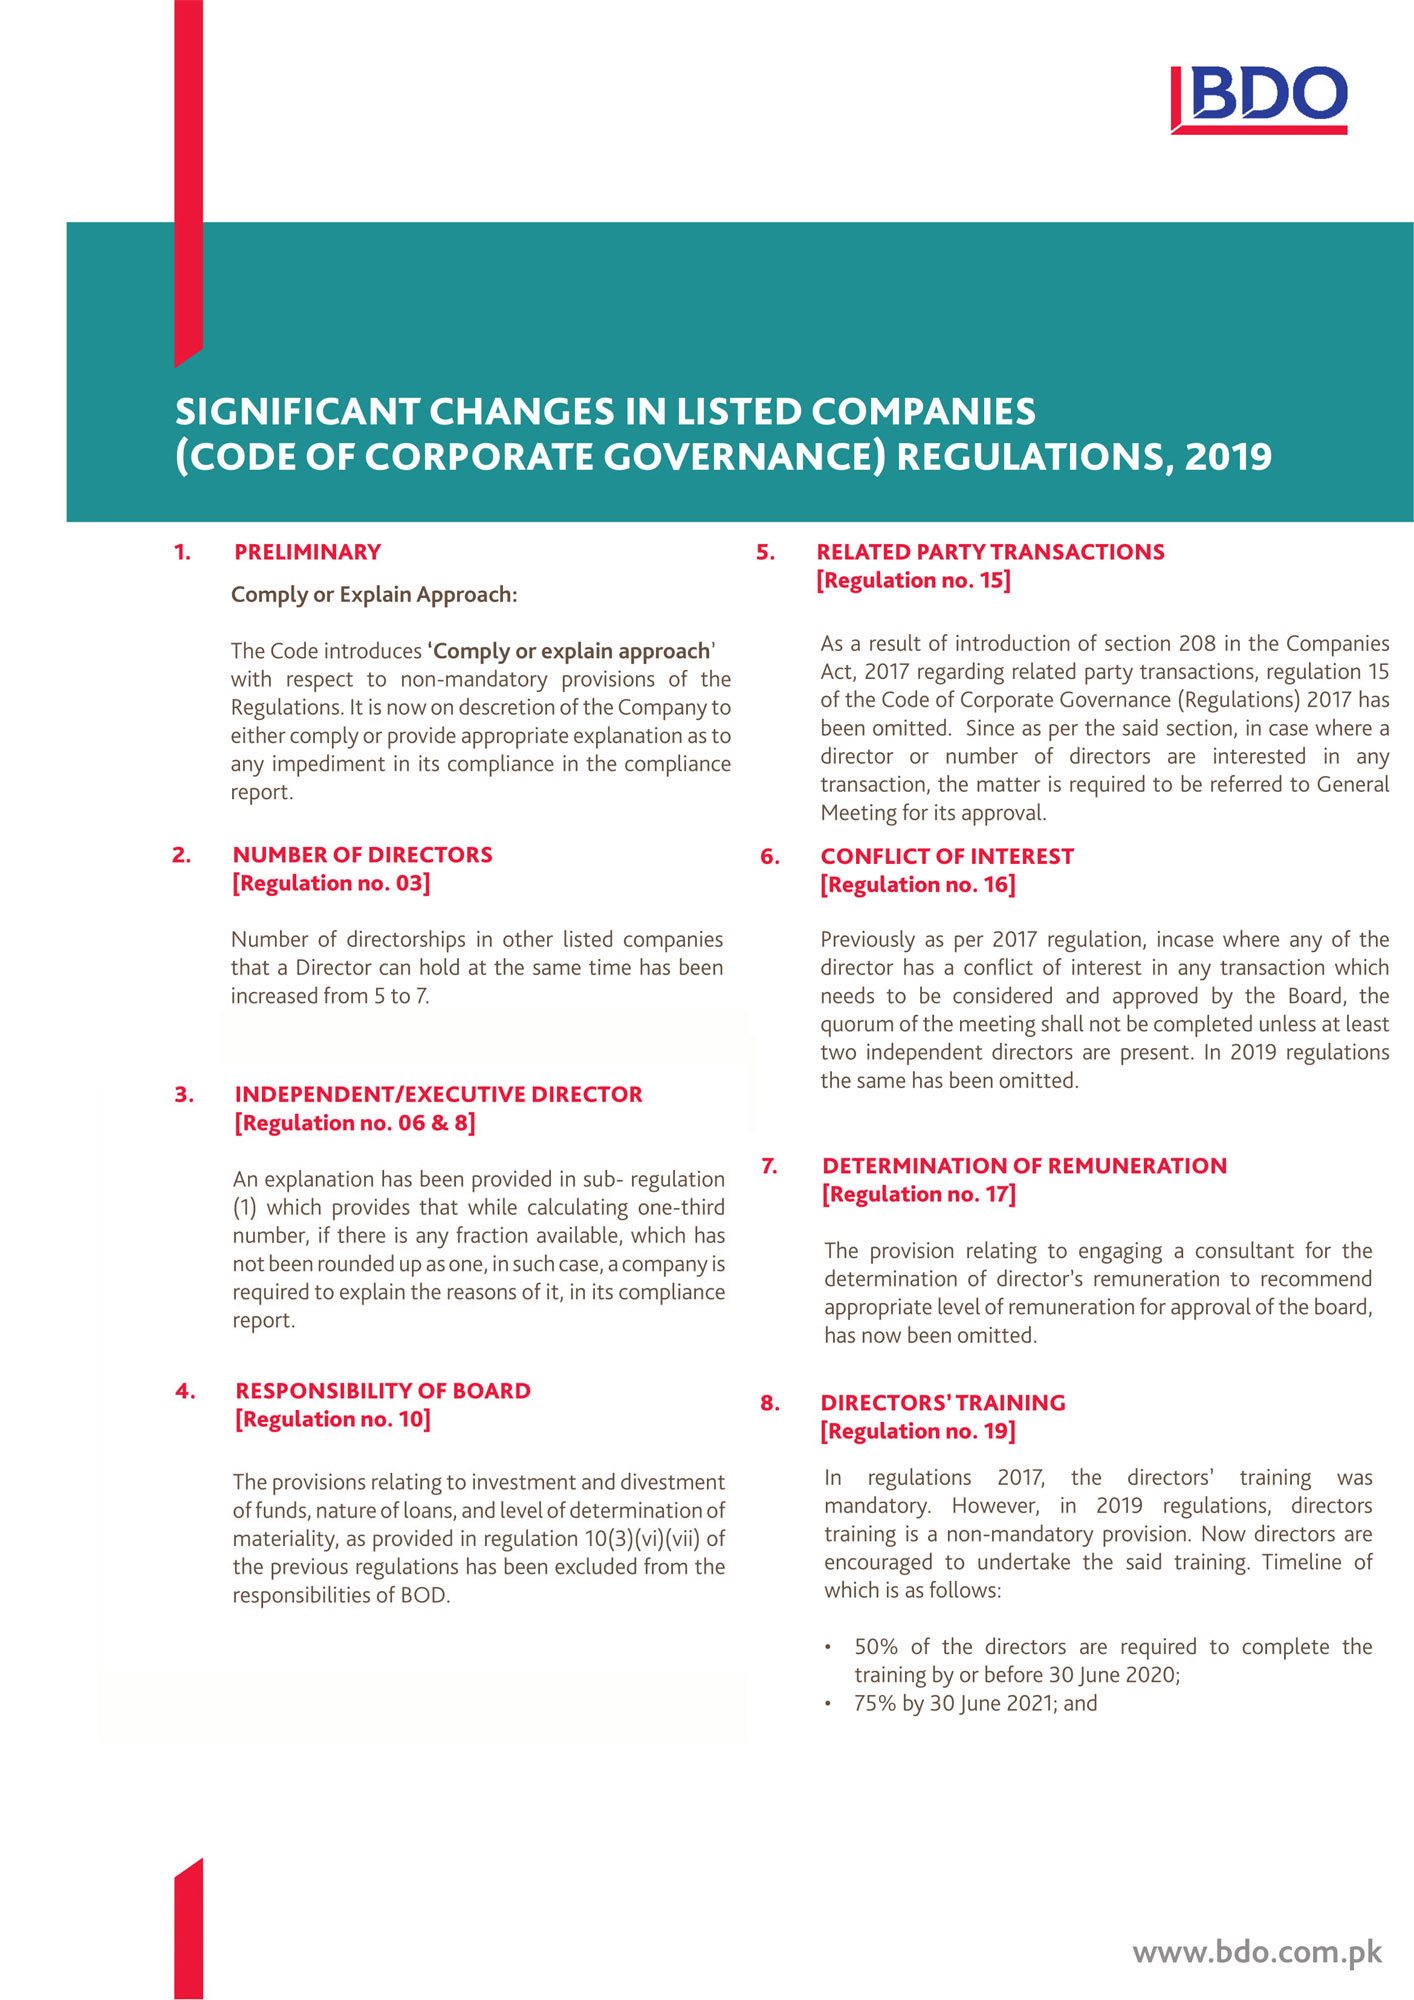 SIGNIFICANT CHANGES IN LISTED COMPANIES (CODE OF CORPORATE GOVERNANCE) REGULATIONS, 2019